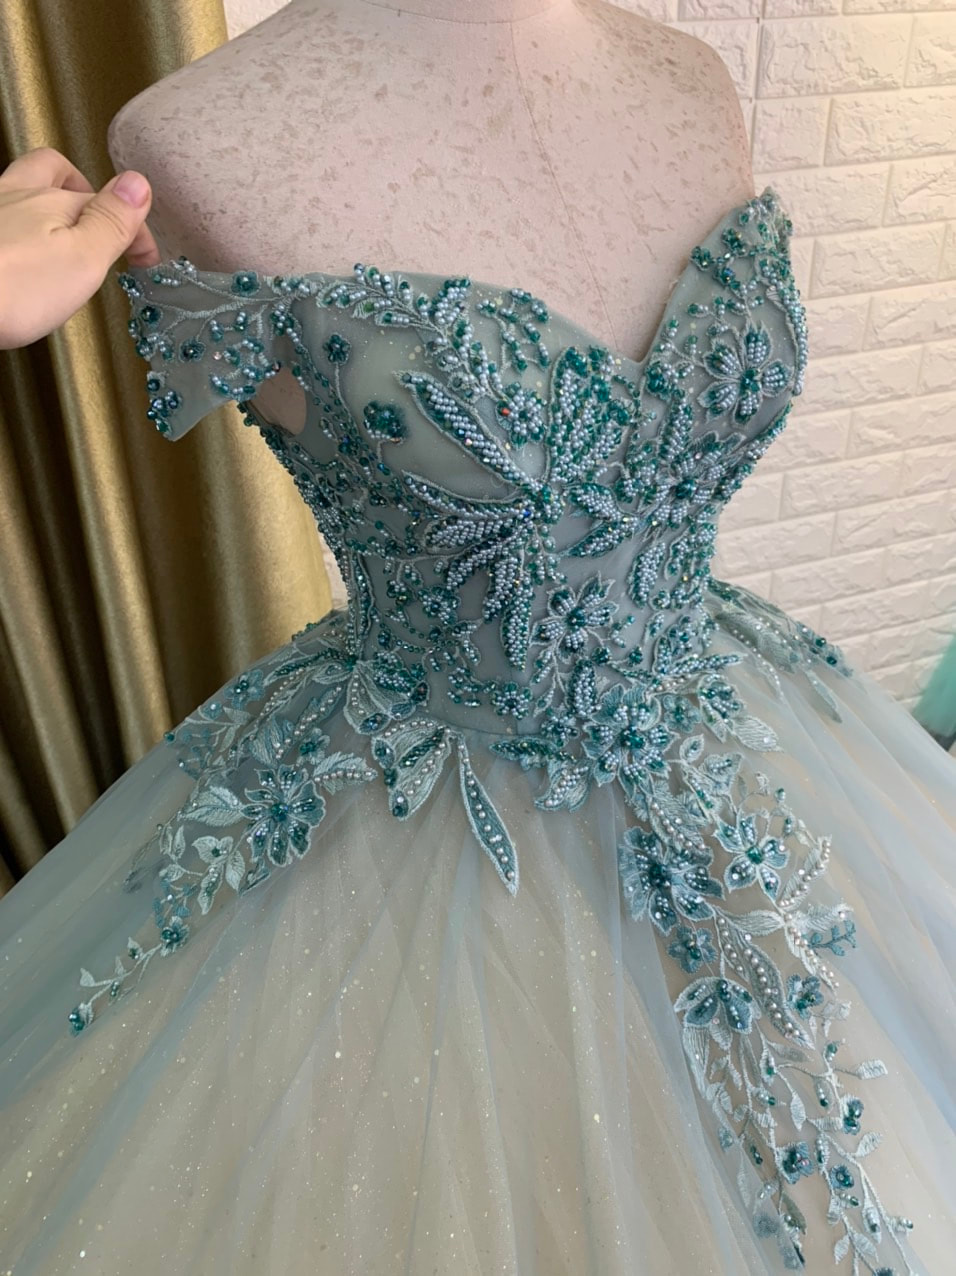 Shades of green - off the shoulder lace ball gown wedding/prom dress ...